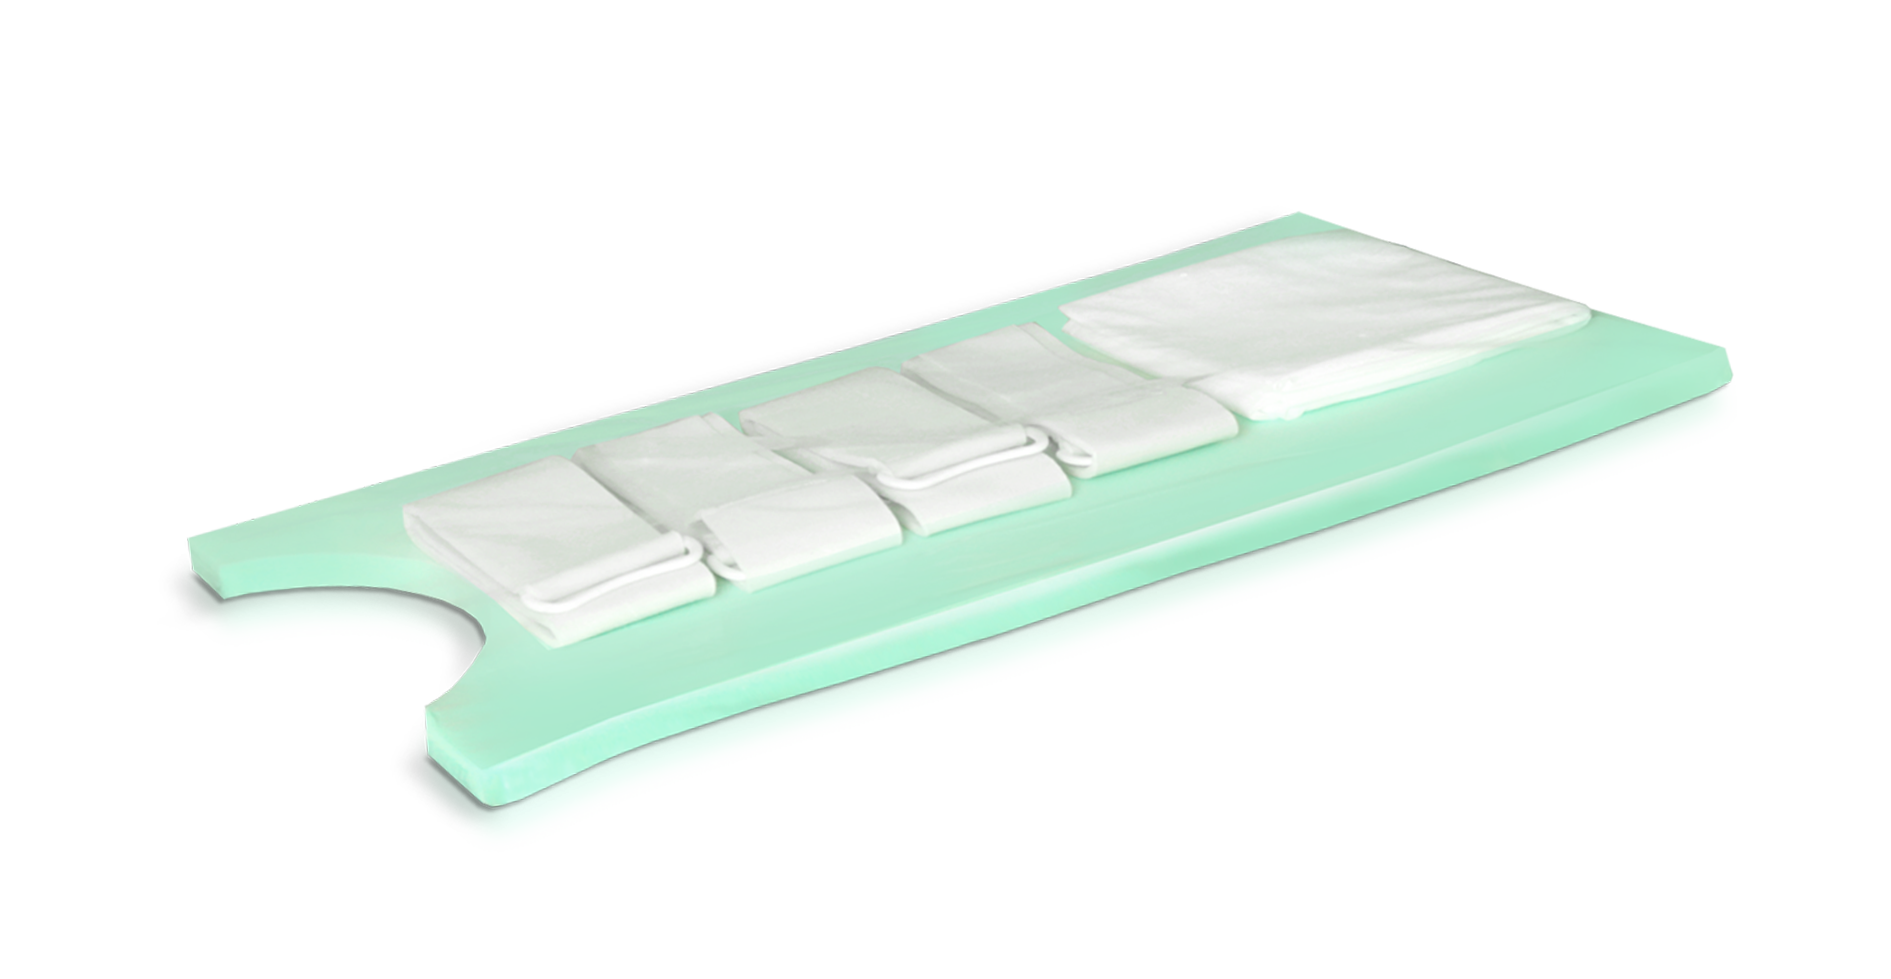 PrimaPad used on the operating table to maintain patient stability